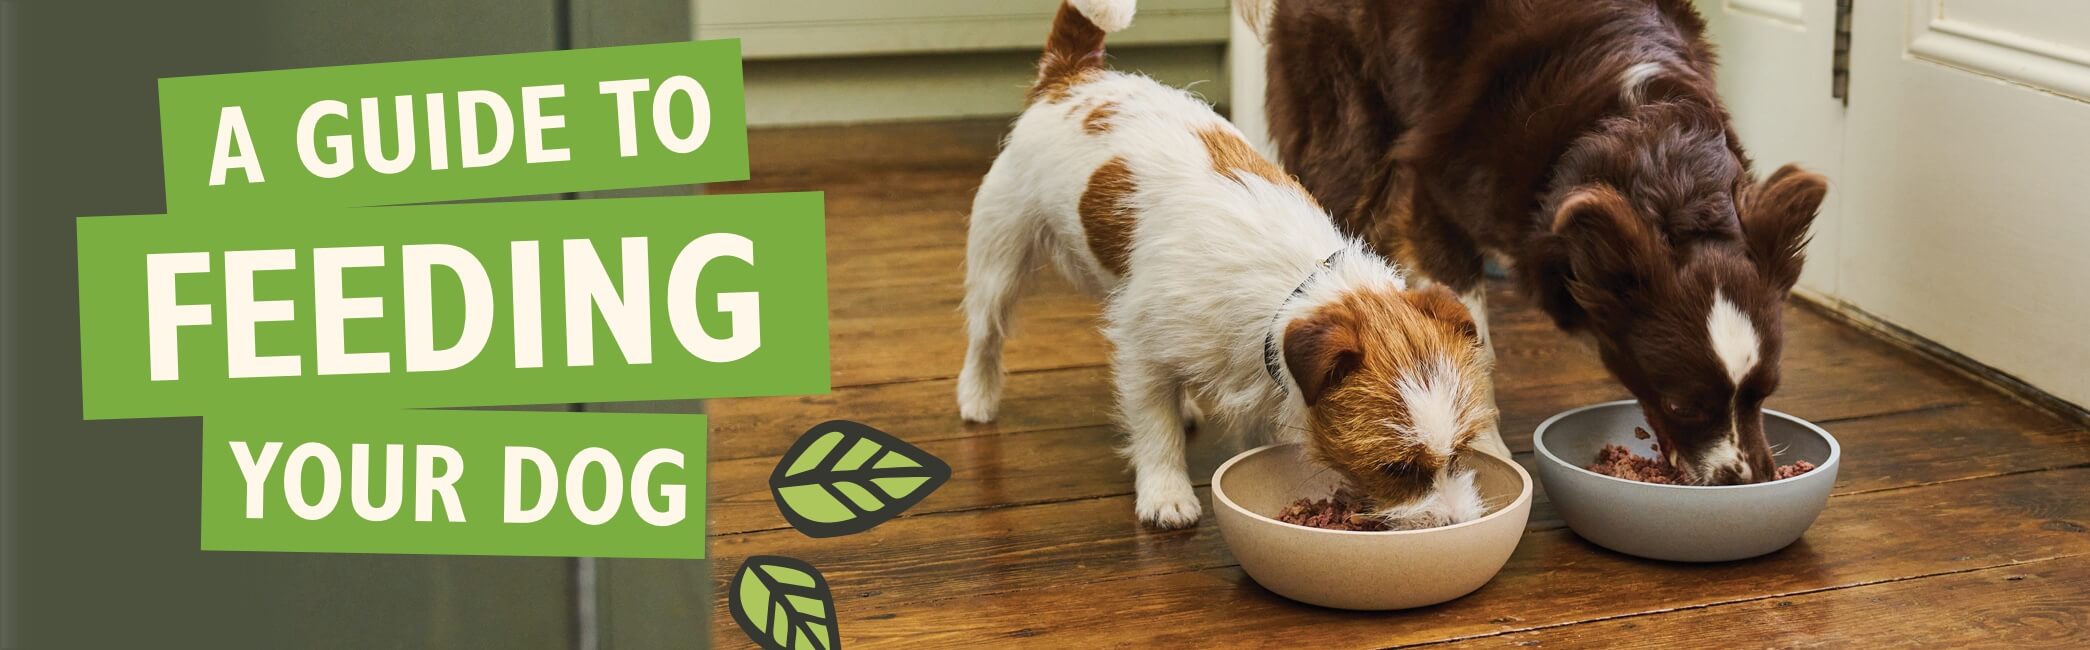 Feeding your Dog Guide